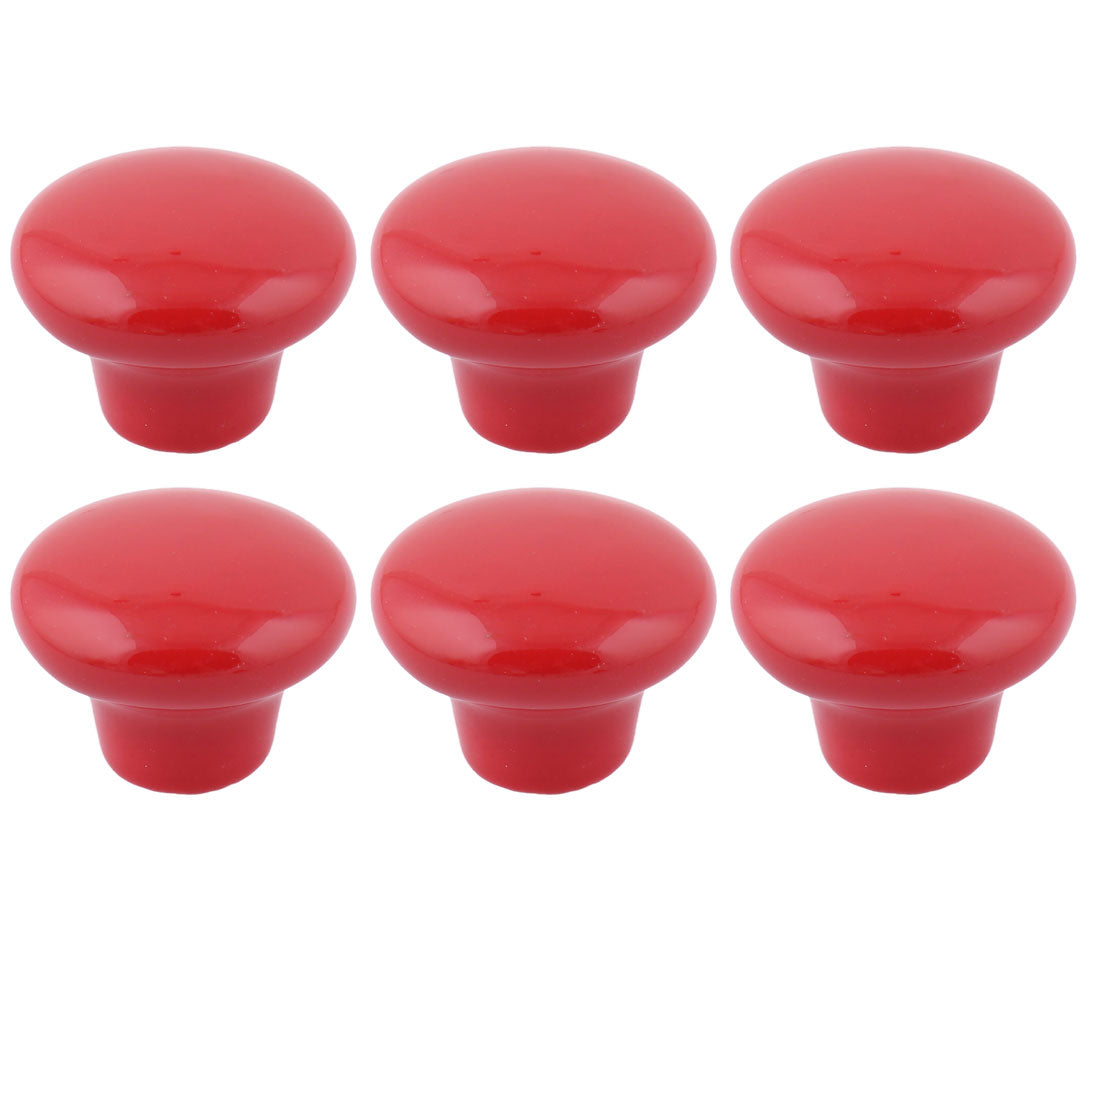 uxcell Uxcell Home Hotel Ceramic Round Furniture Cupboard Wardrobe Drawer Pull Knobs Red 6 Pcs